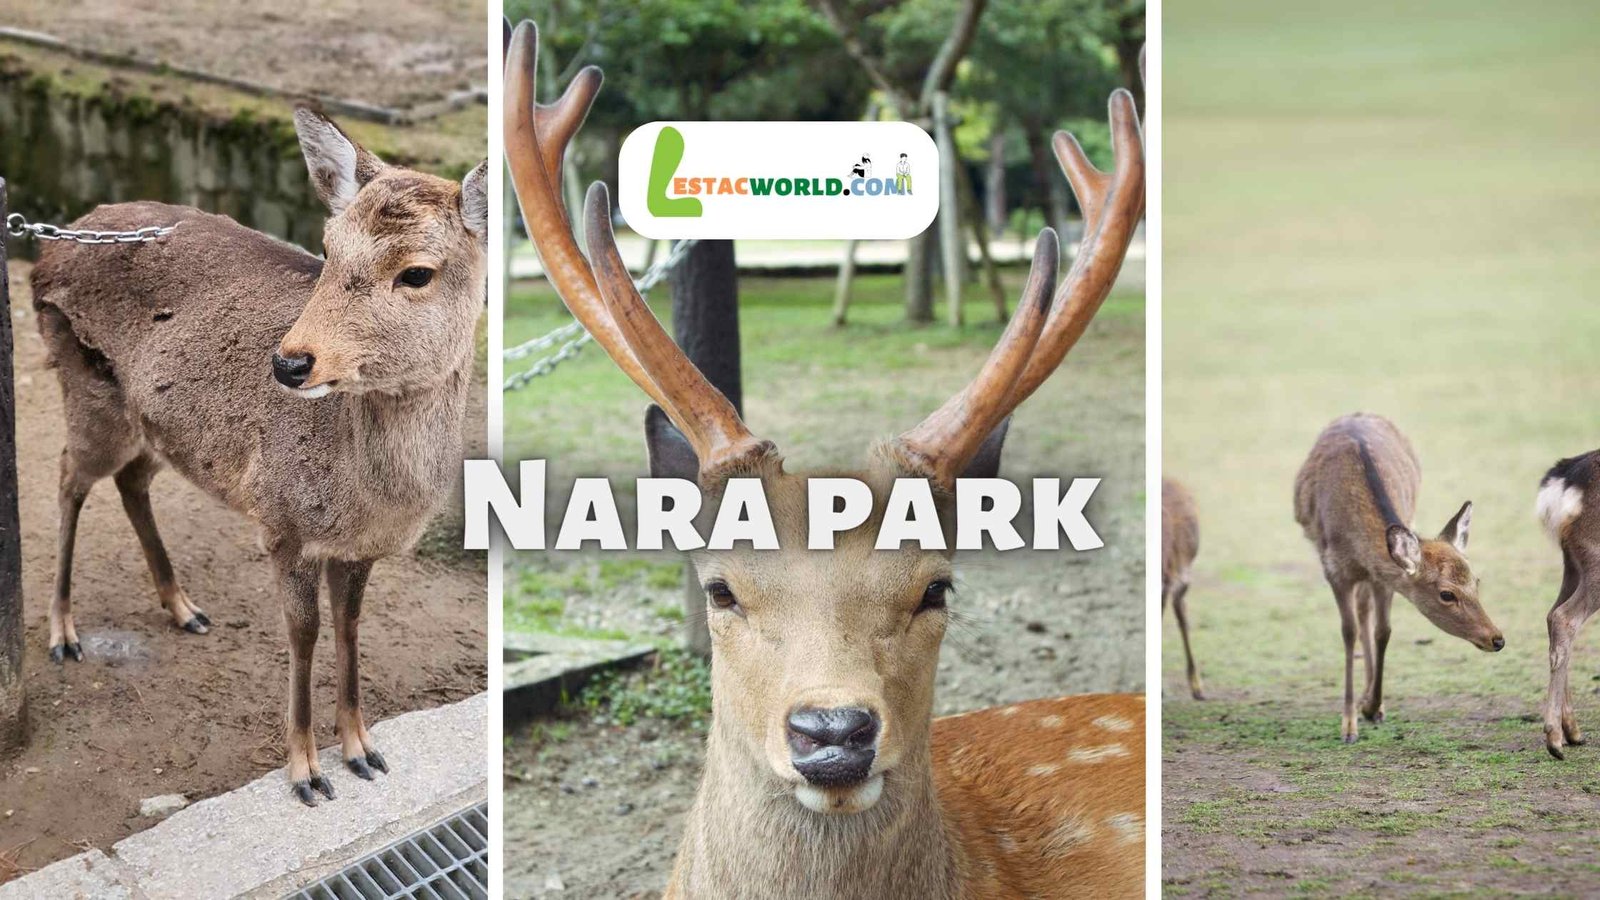 Friendly deer in Nara Park - an essential part of your visit to Nara